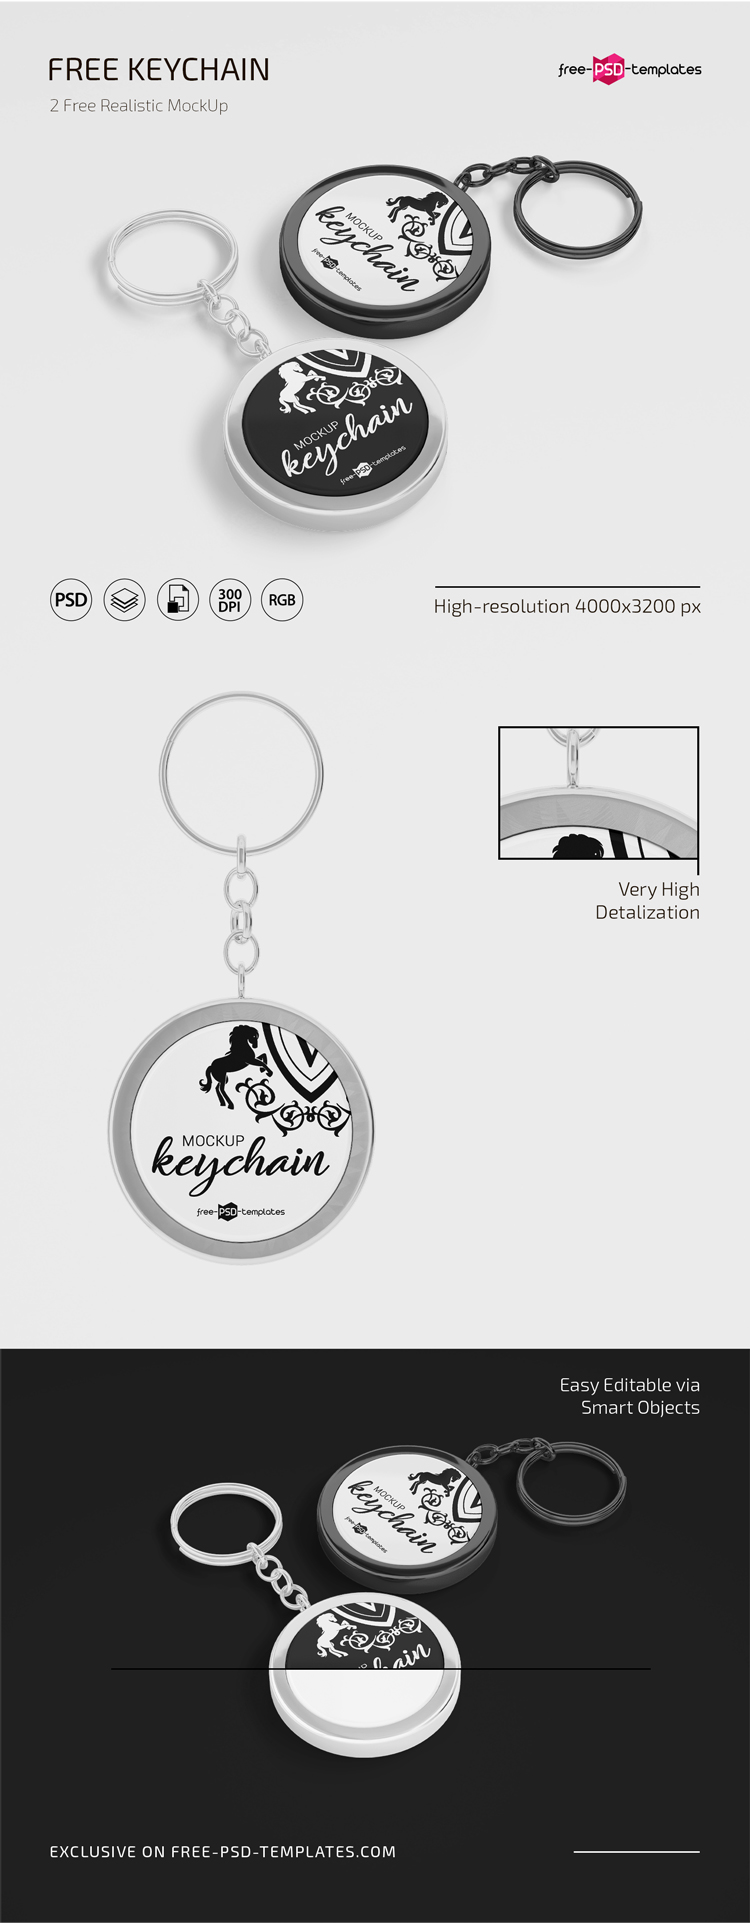 Download Keychain Mockup Psd Free Download : Free Keychain Mockup Psd Files by Zee Que | Designbolts on ...